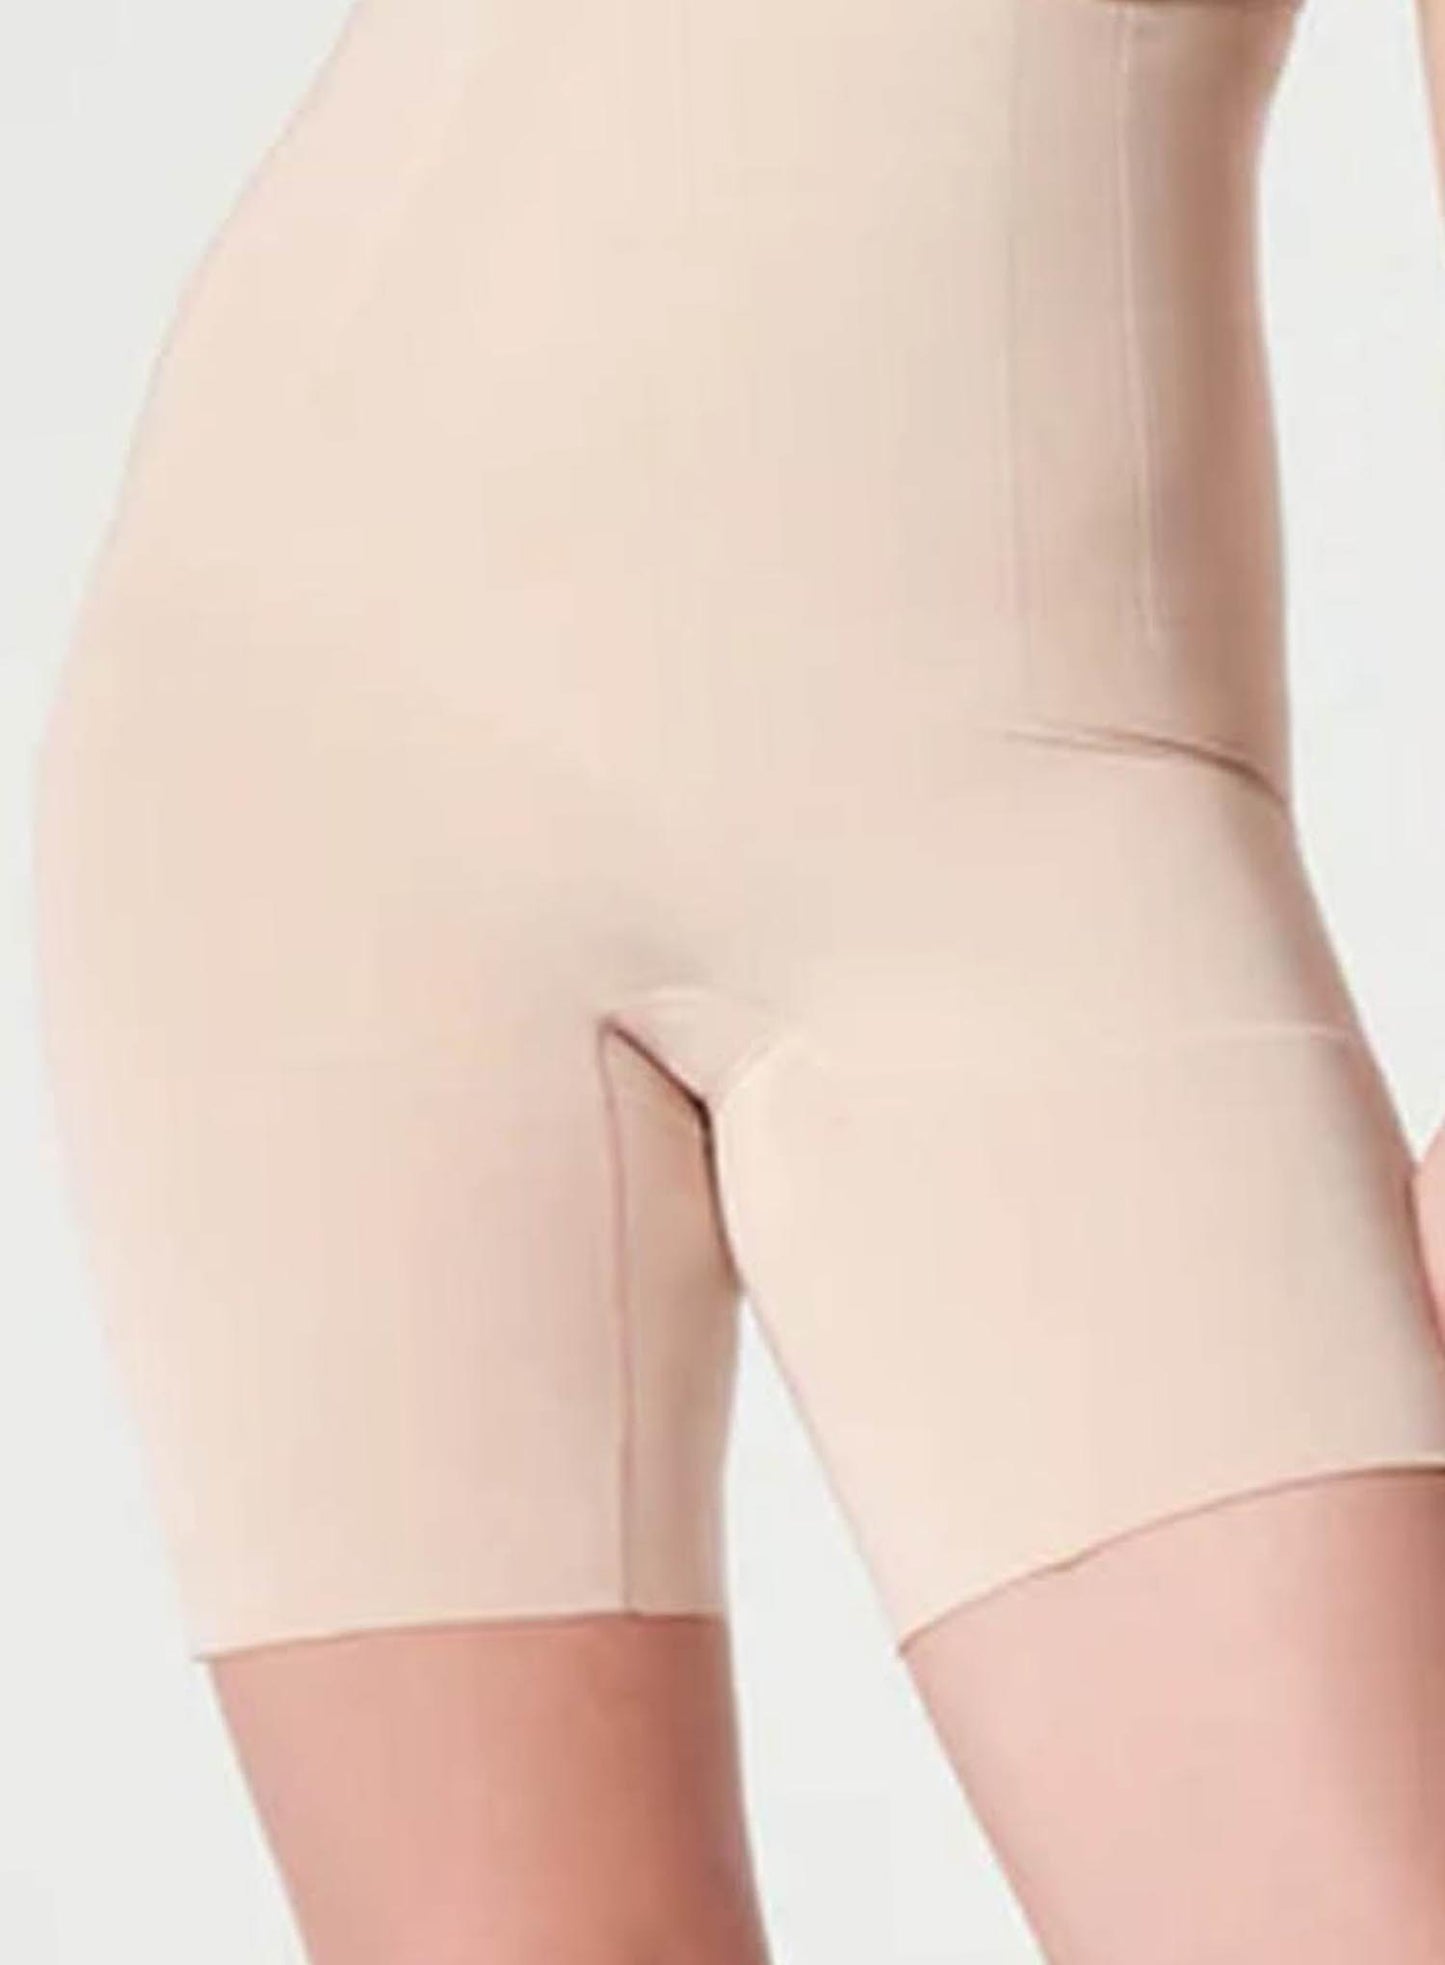 Spanx: Oncore High Waisted Mid Thigh Slimmer Nude